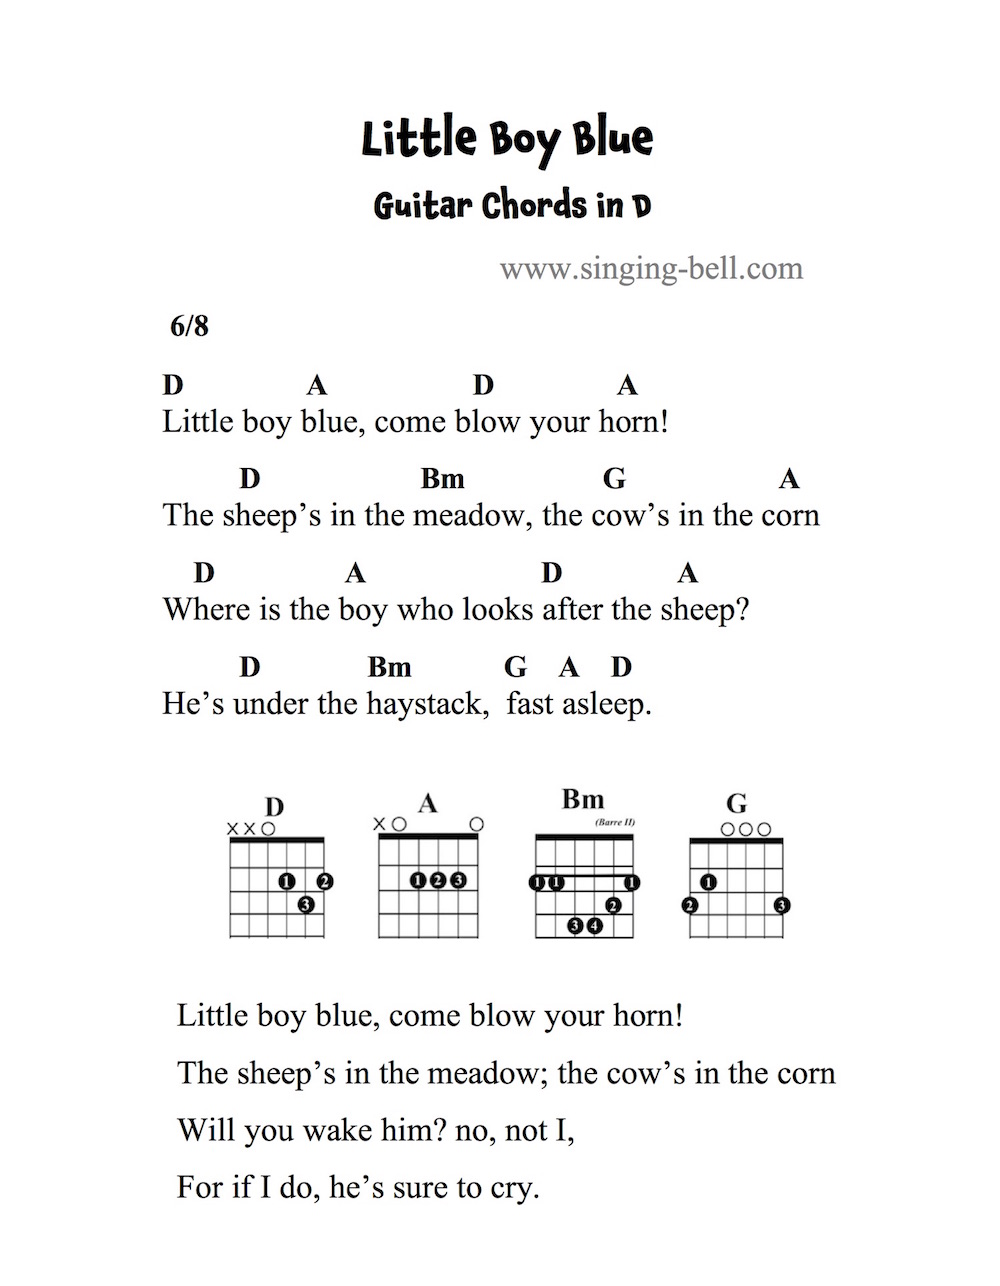 Little Boy Blue - Guitar Chords and Tabs in D.